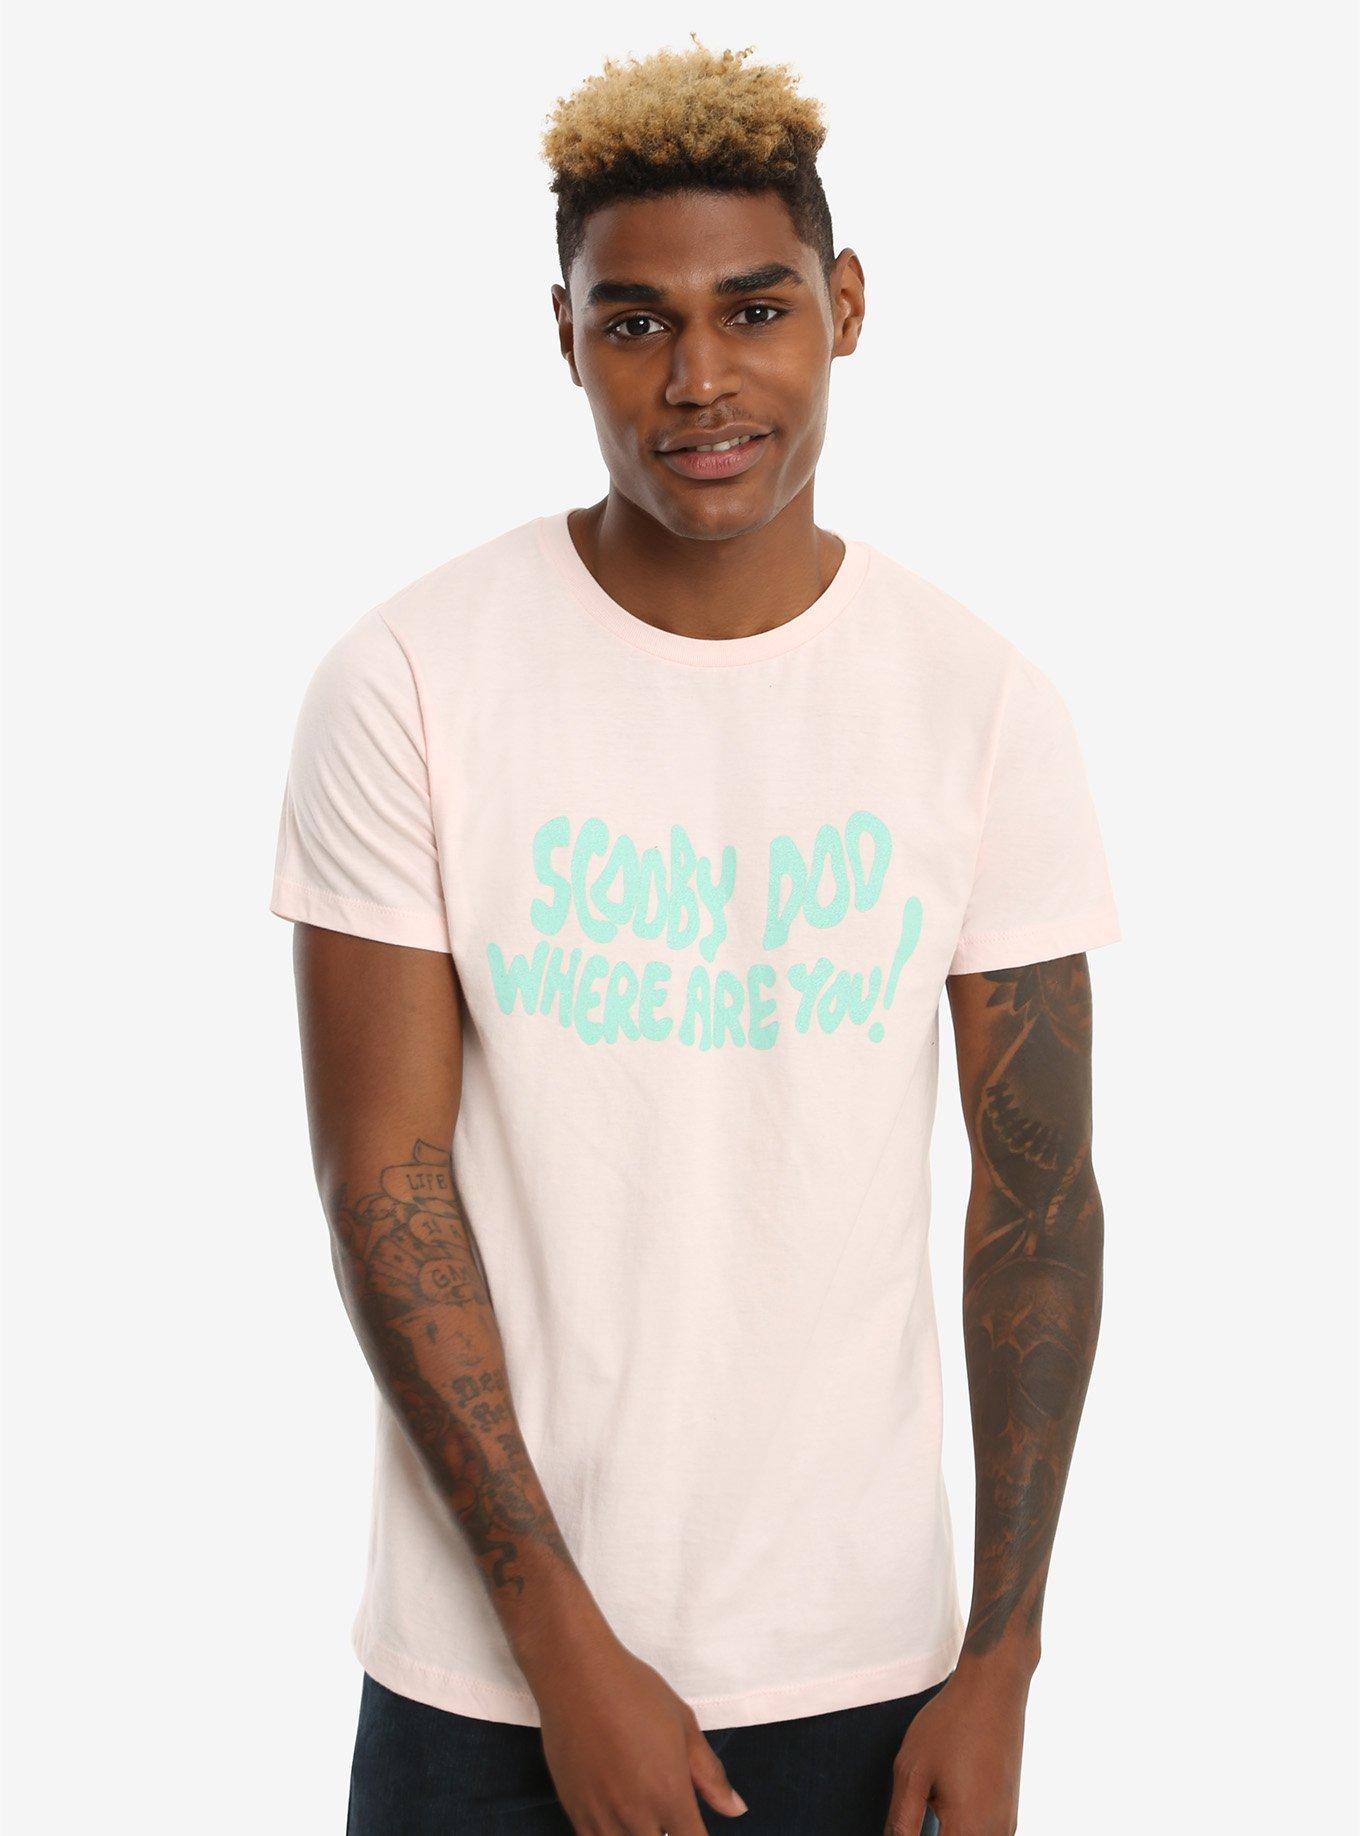 Scooby-Doo Where Are You! T-Shirt, PINK, alternate